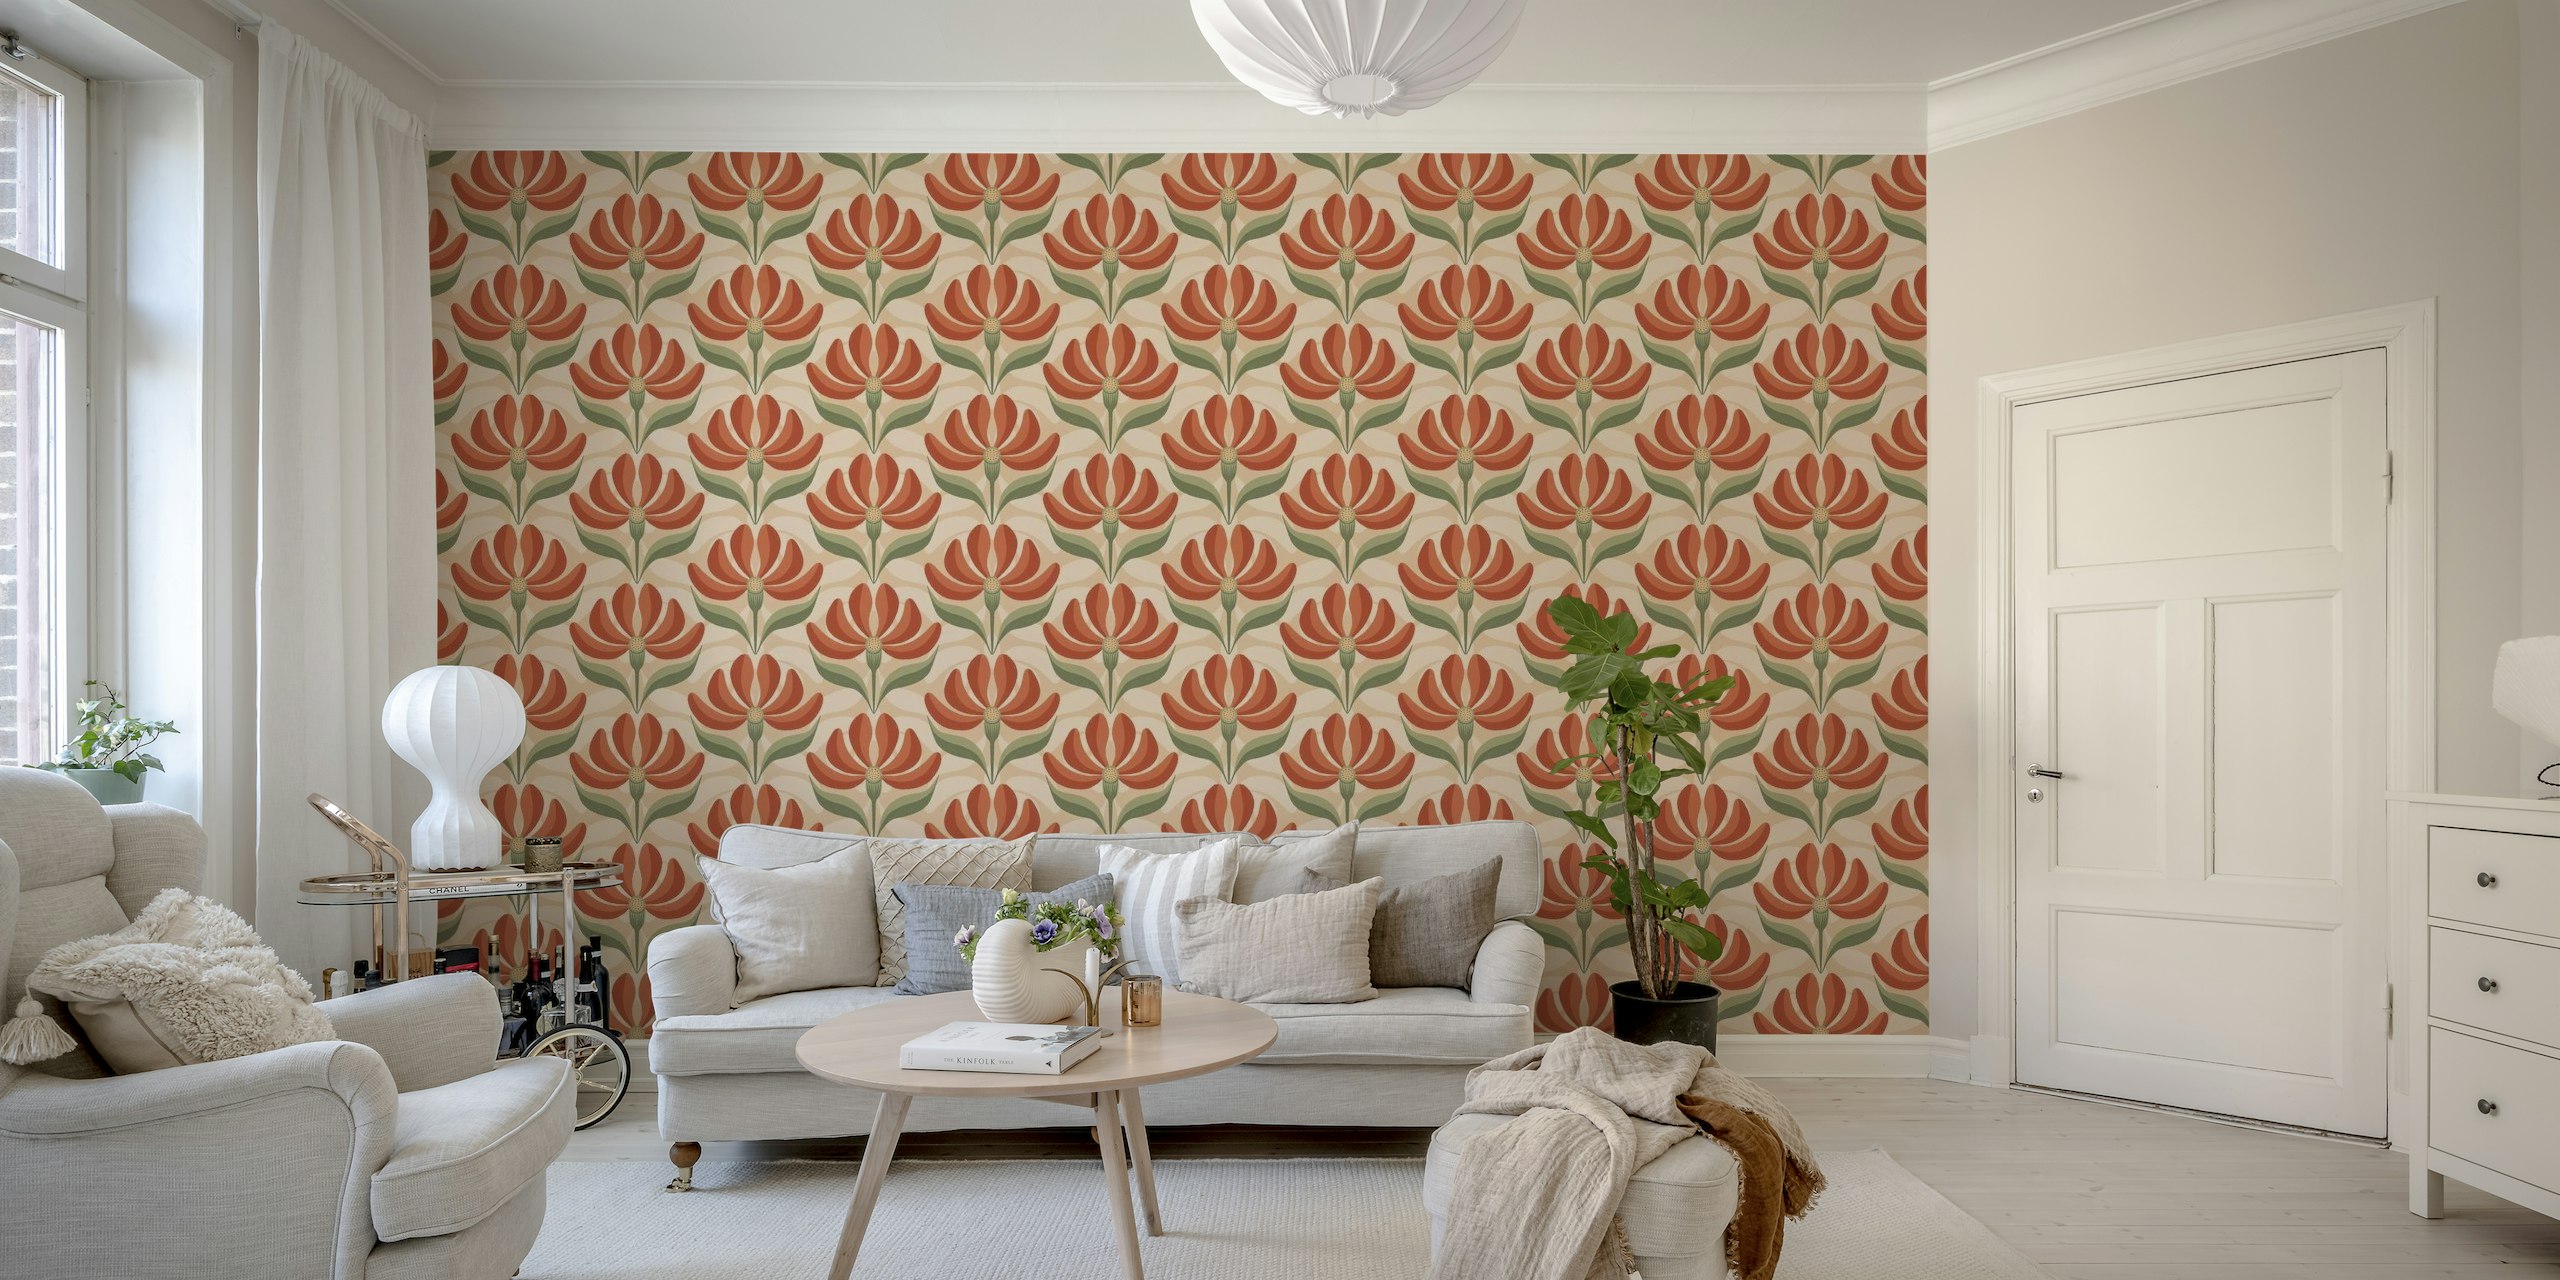 Retro Geometric Floral Red and Peachy Color wallpaper